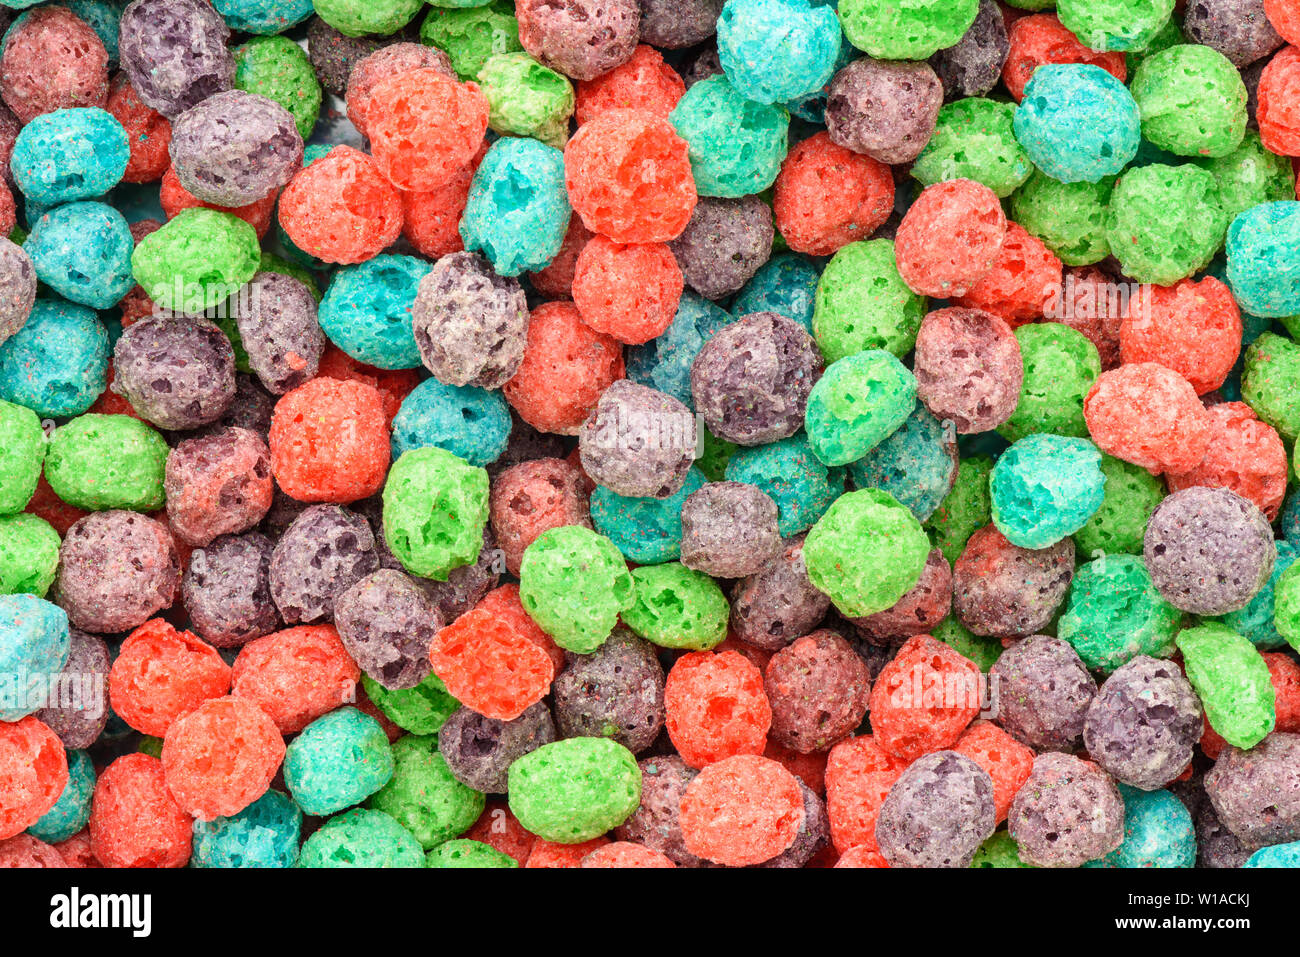 Cereal background. Colorful breakfast food Stock Photo